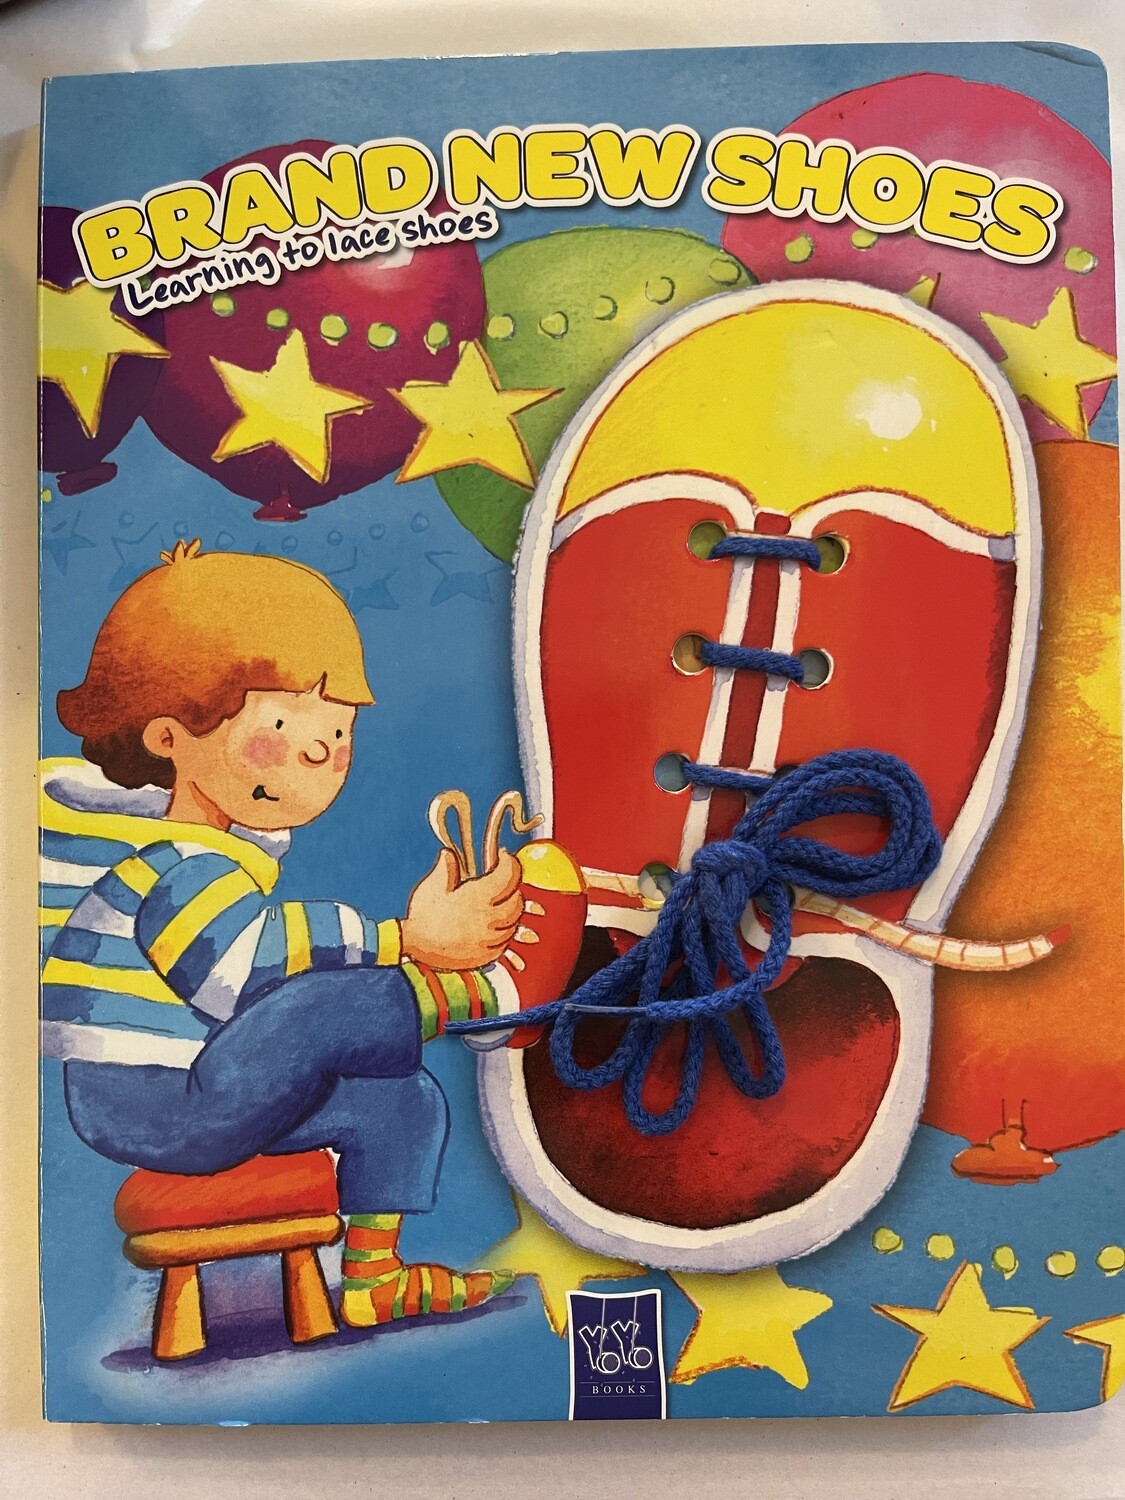 Brand New Shoes Children's Book